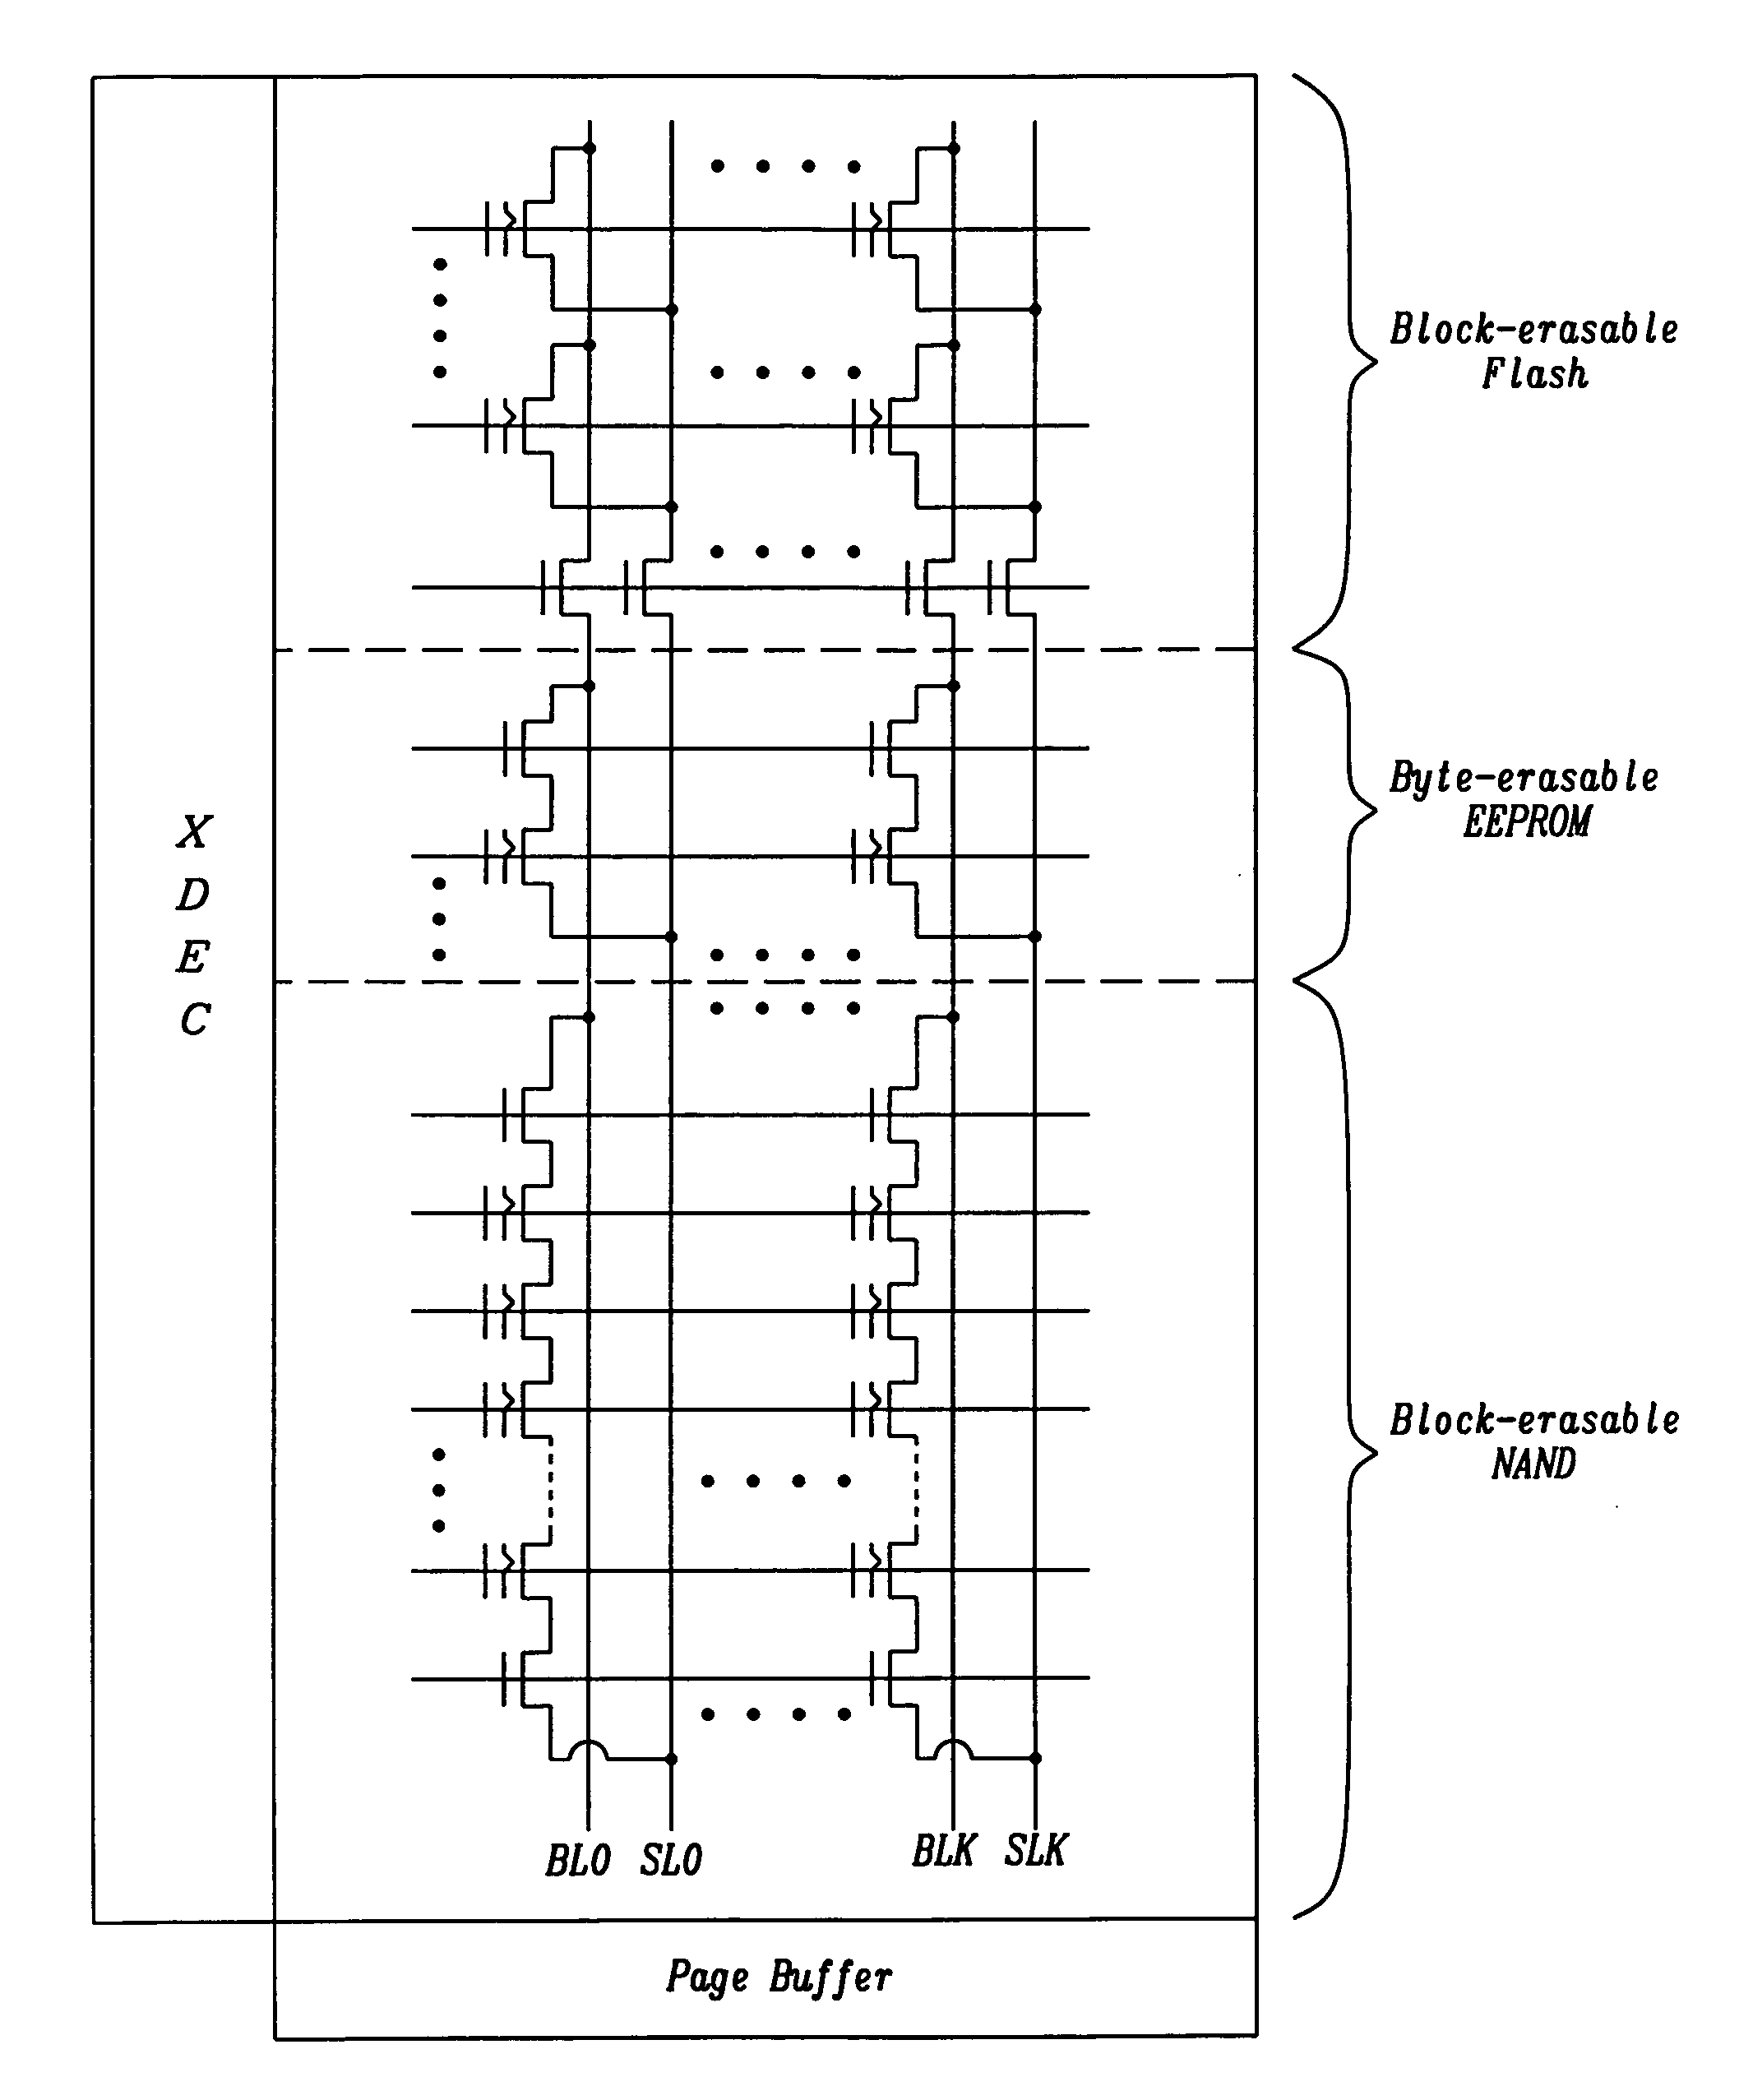 Most compact flotox-based combo NVM design without sacrificing EEPROM endurance cycles for 1-die data and code storage